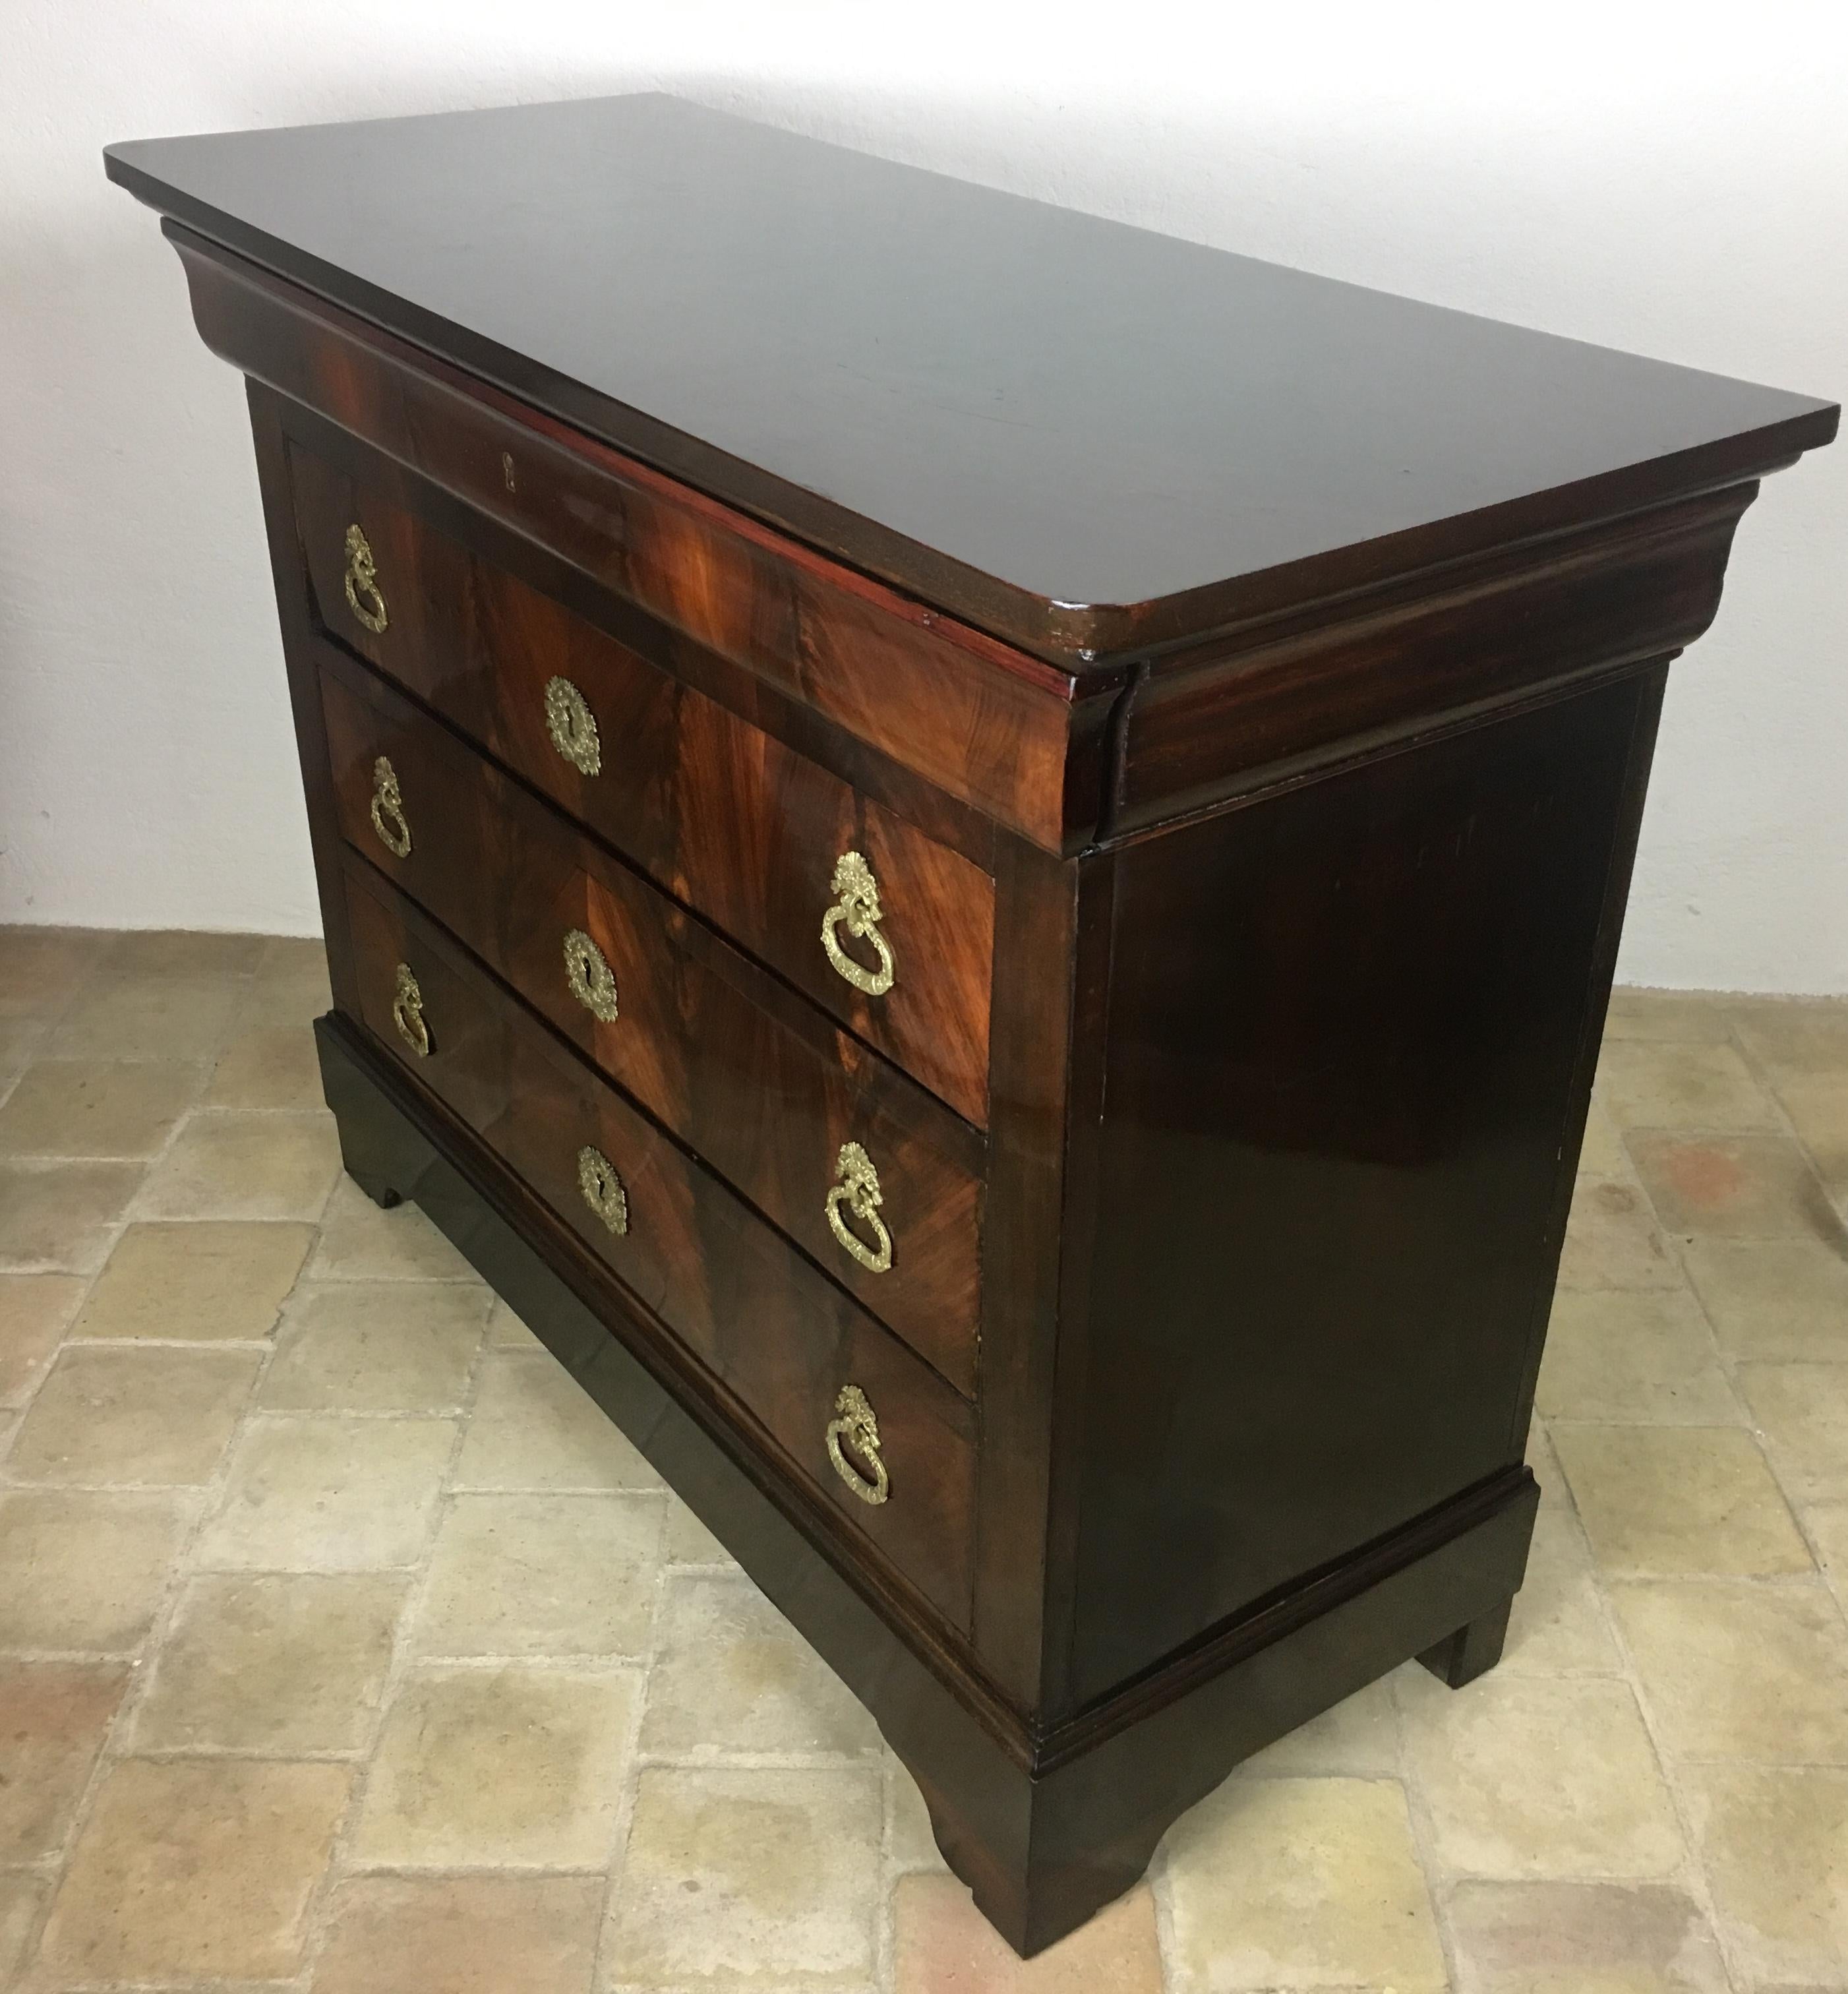 French 19th Century Louis Philippe Commode/Chest of Drawers Flame Mahogany (19. Jahrhundert)